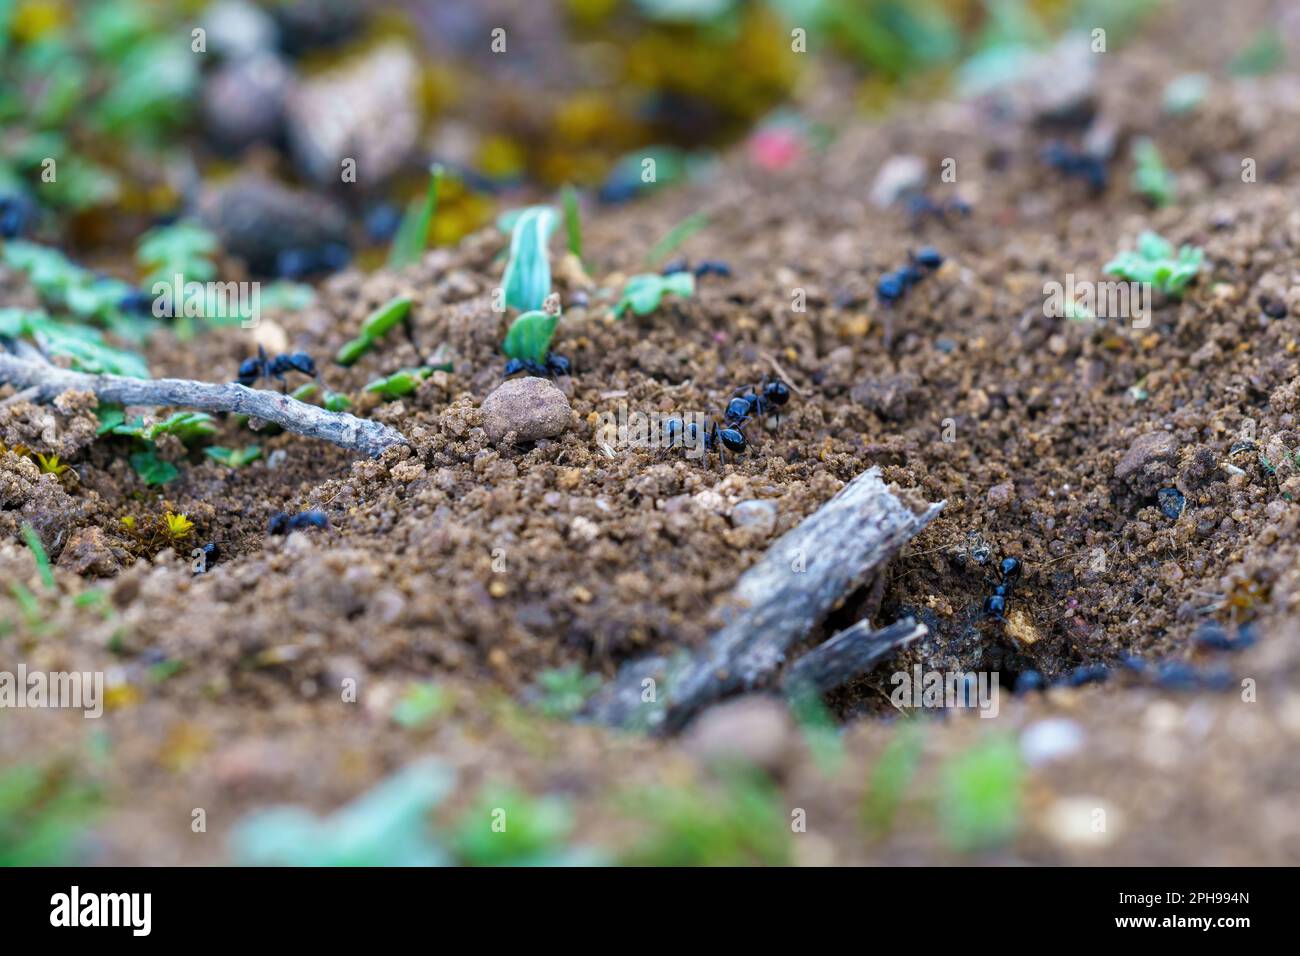 Ants walking on the ground next to their nest looking for food in macro close by Stock Photo